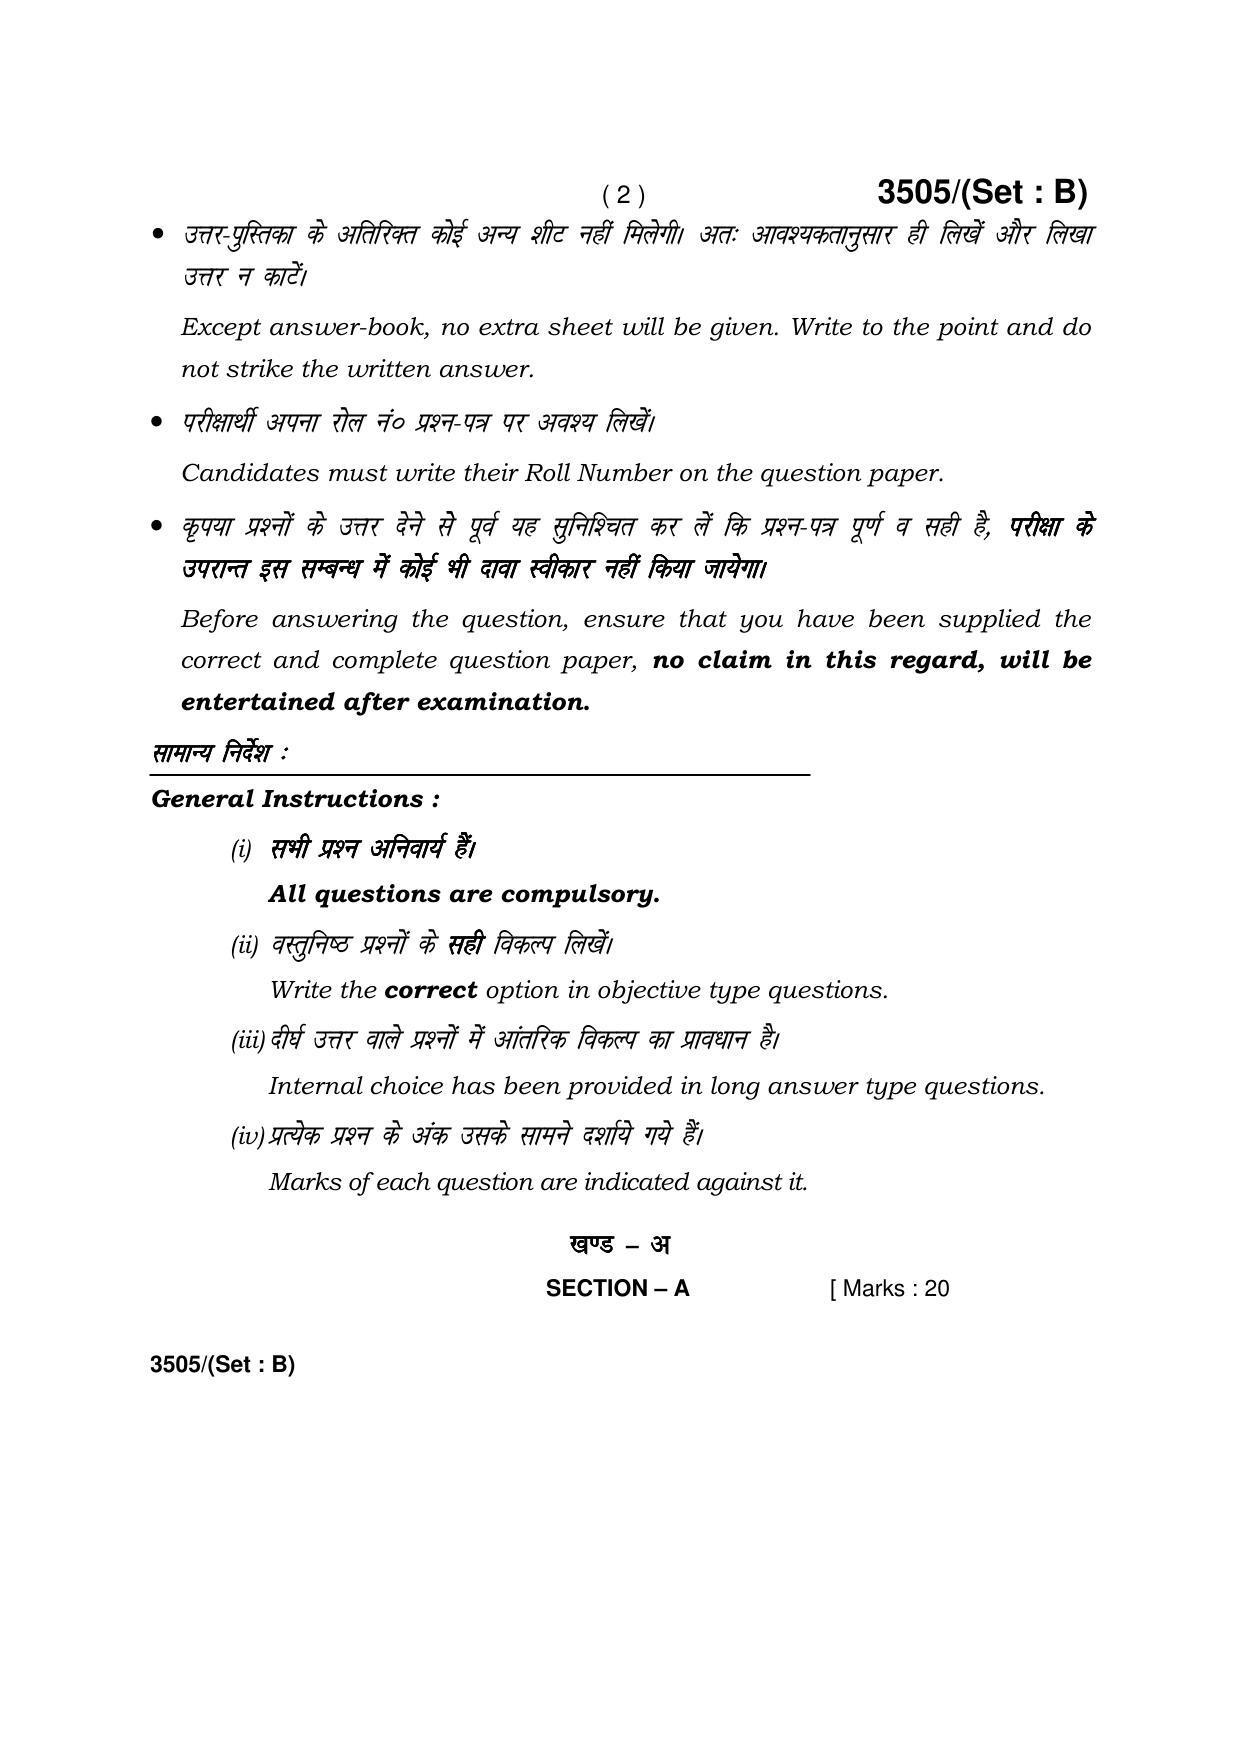 Haryana Board HBSE Class 10 Science -B 2018 Question Paper - Page 2